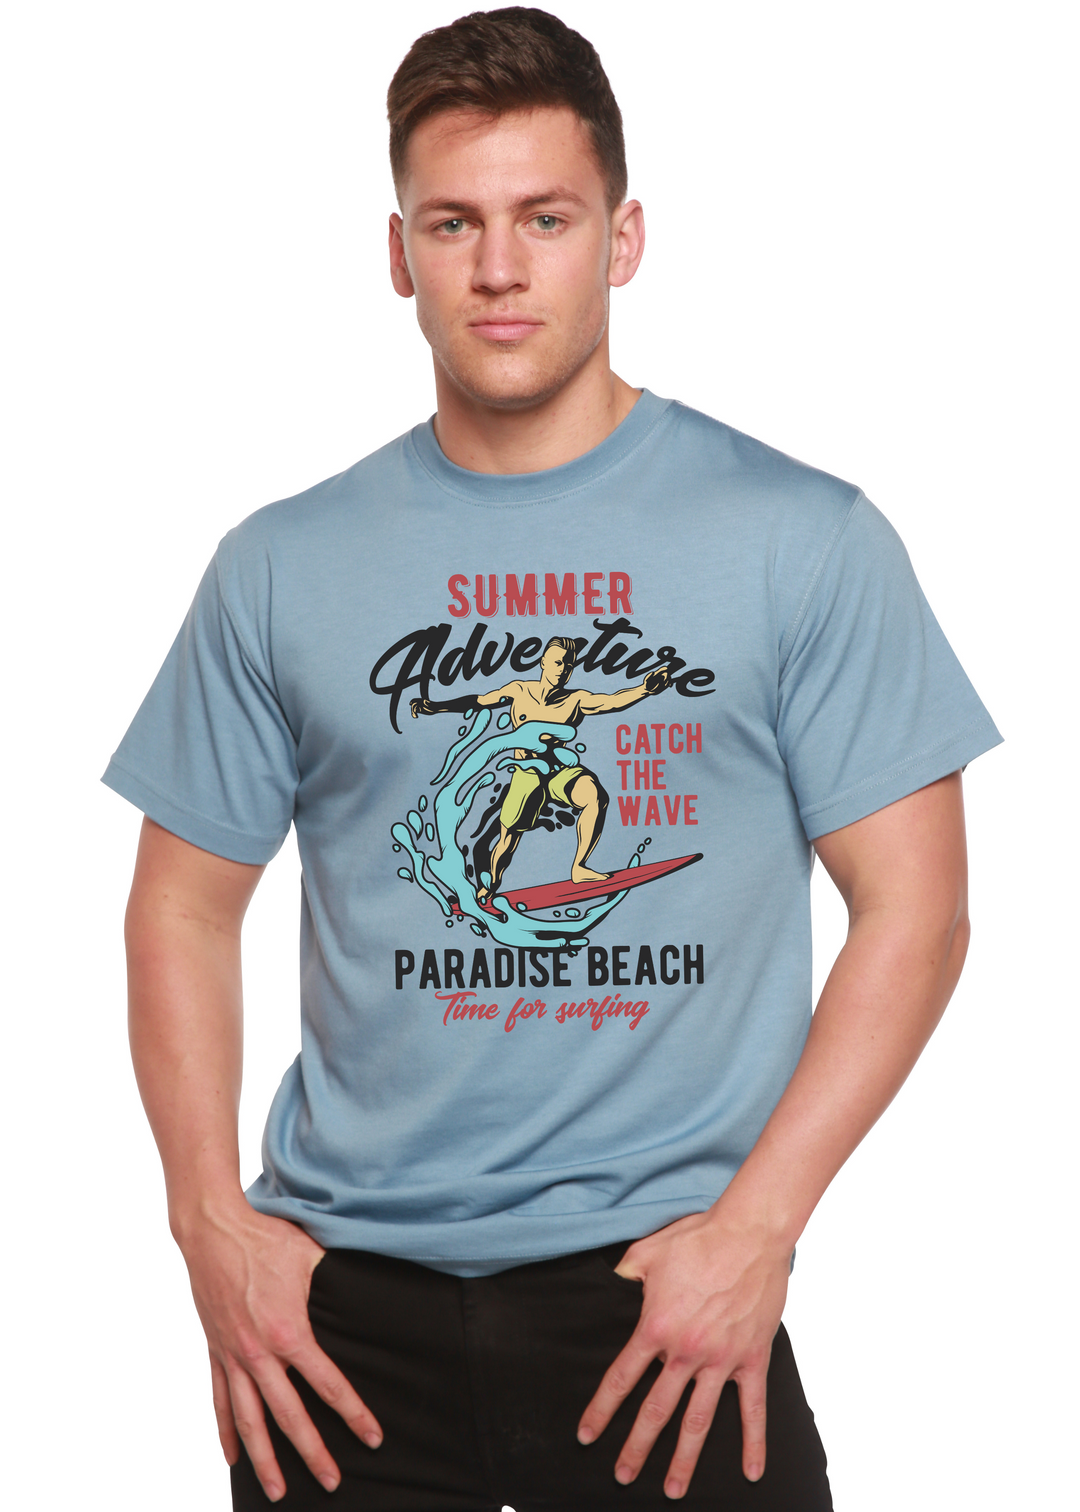 Catch The Wave men's bamboo tshirt infinity blue